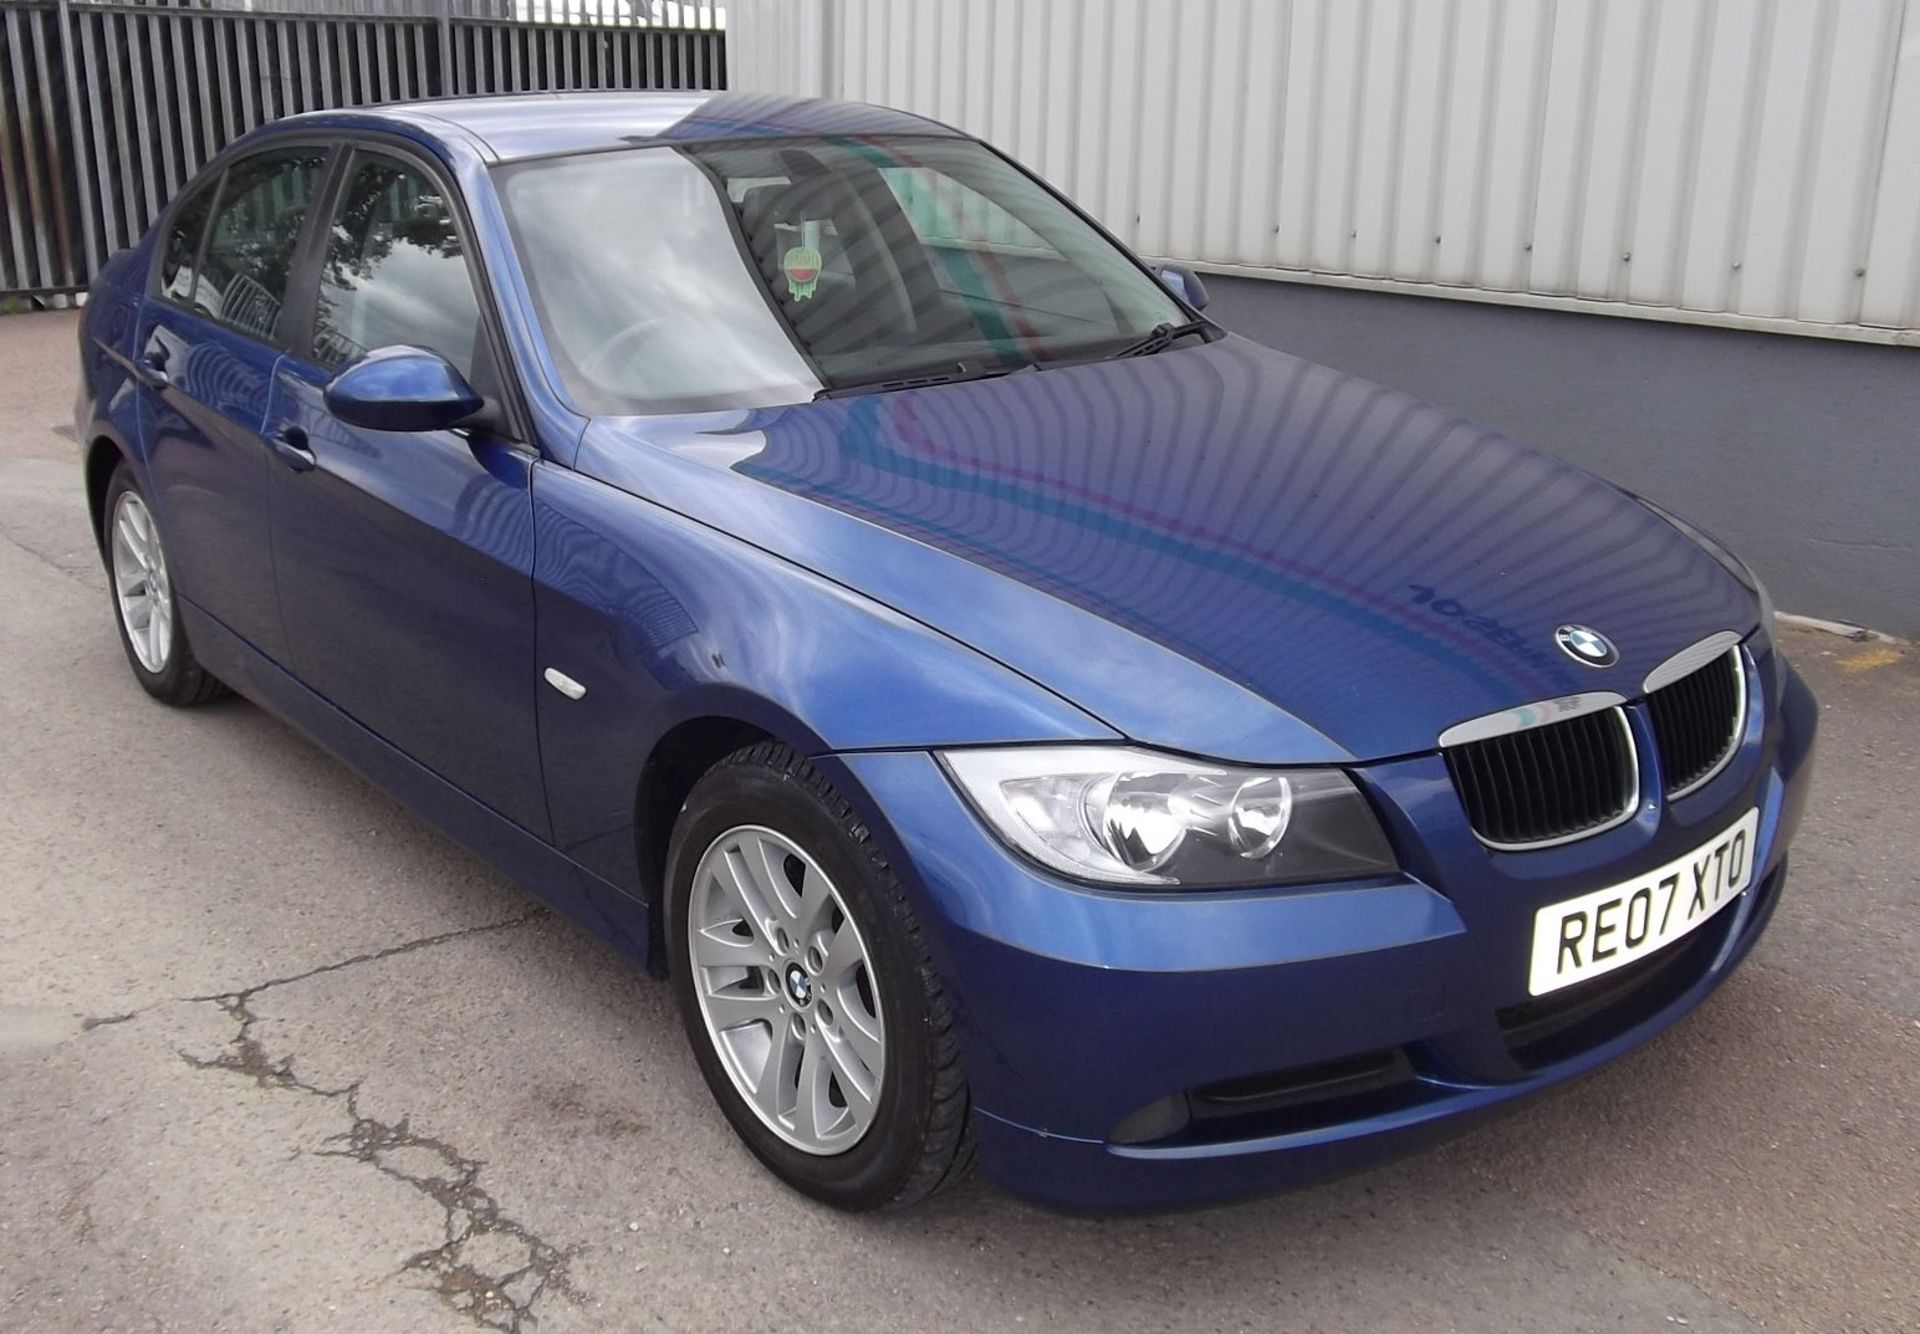 2007 BMW 318i SE 4 Door Saloon - CL505 - NO VAT ON THE HAMMER - Location: Corby - Image 4 of 11